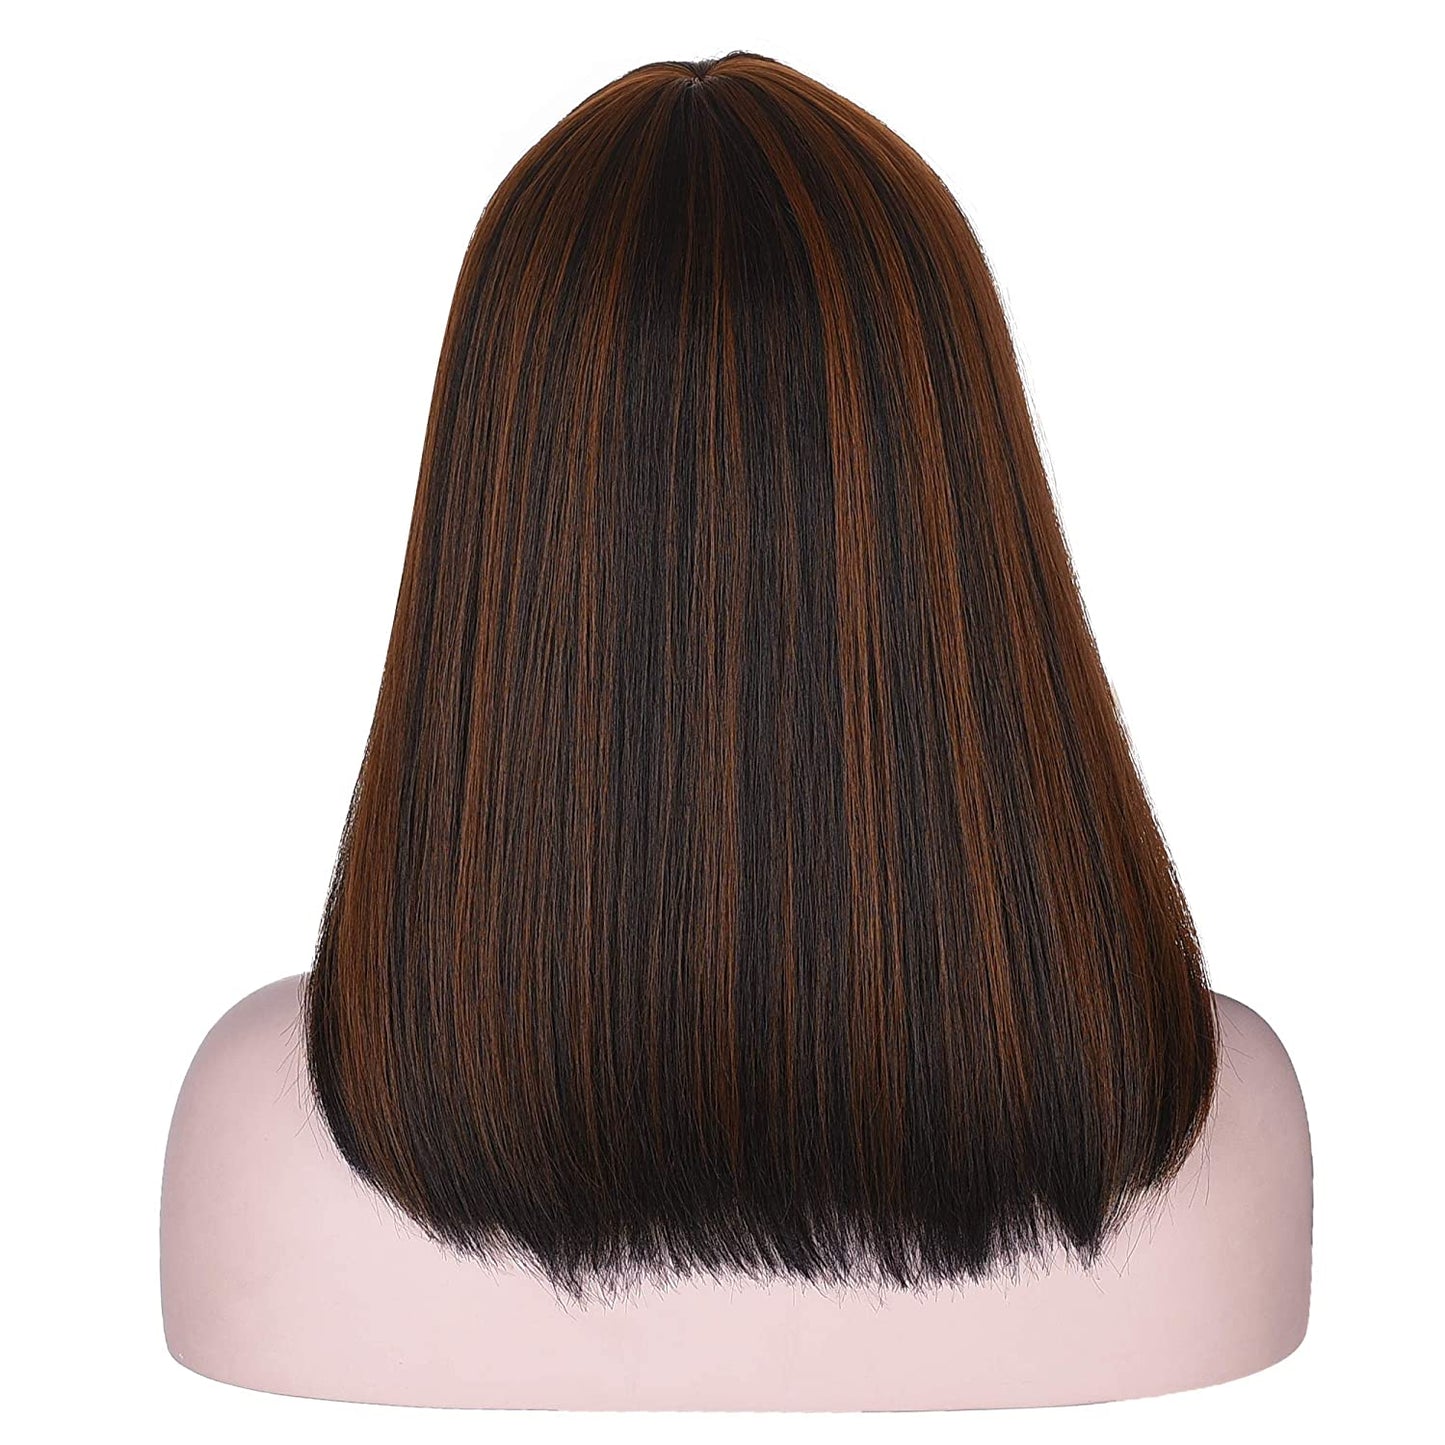 Lush Locks 15 Inch Short Straight Black with Brown Highlights Bob Wig with Bangs